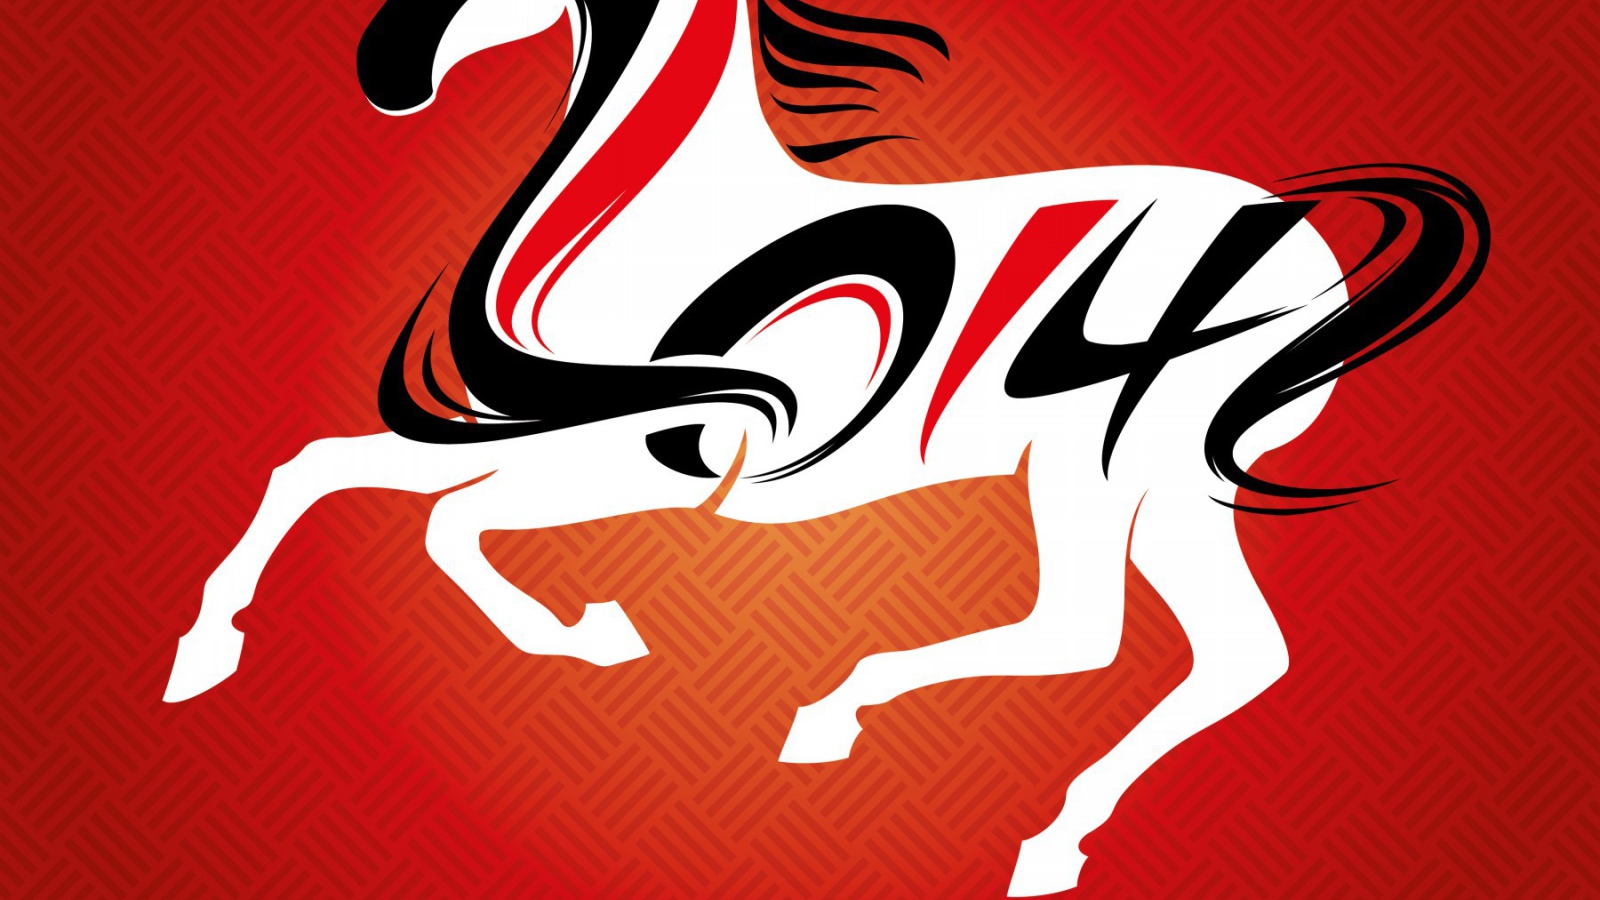 New Year 2014 - the year of the horse, red background